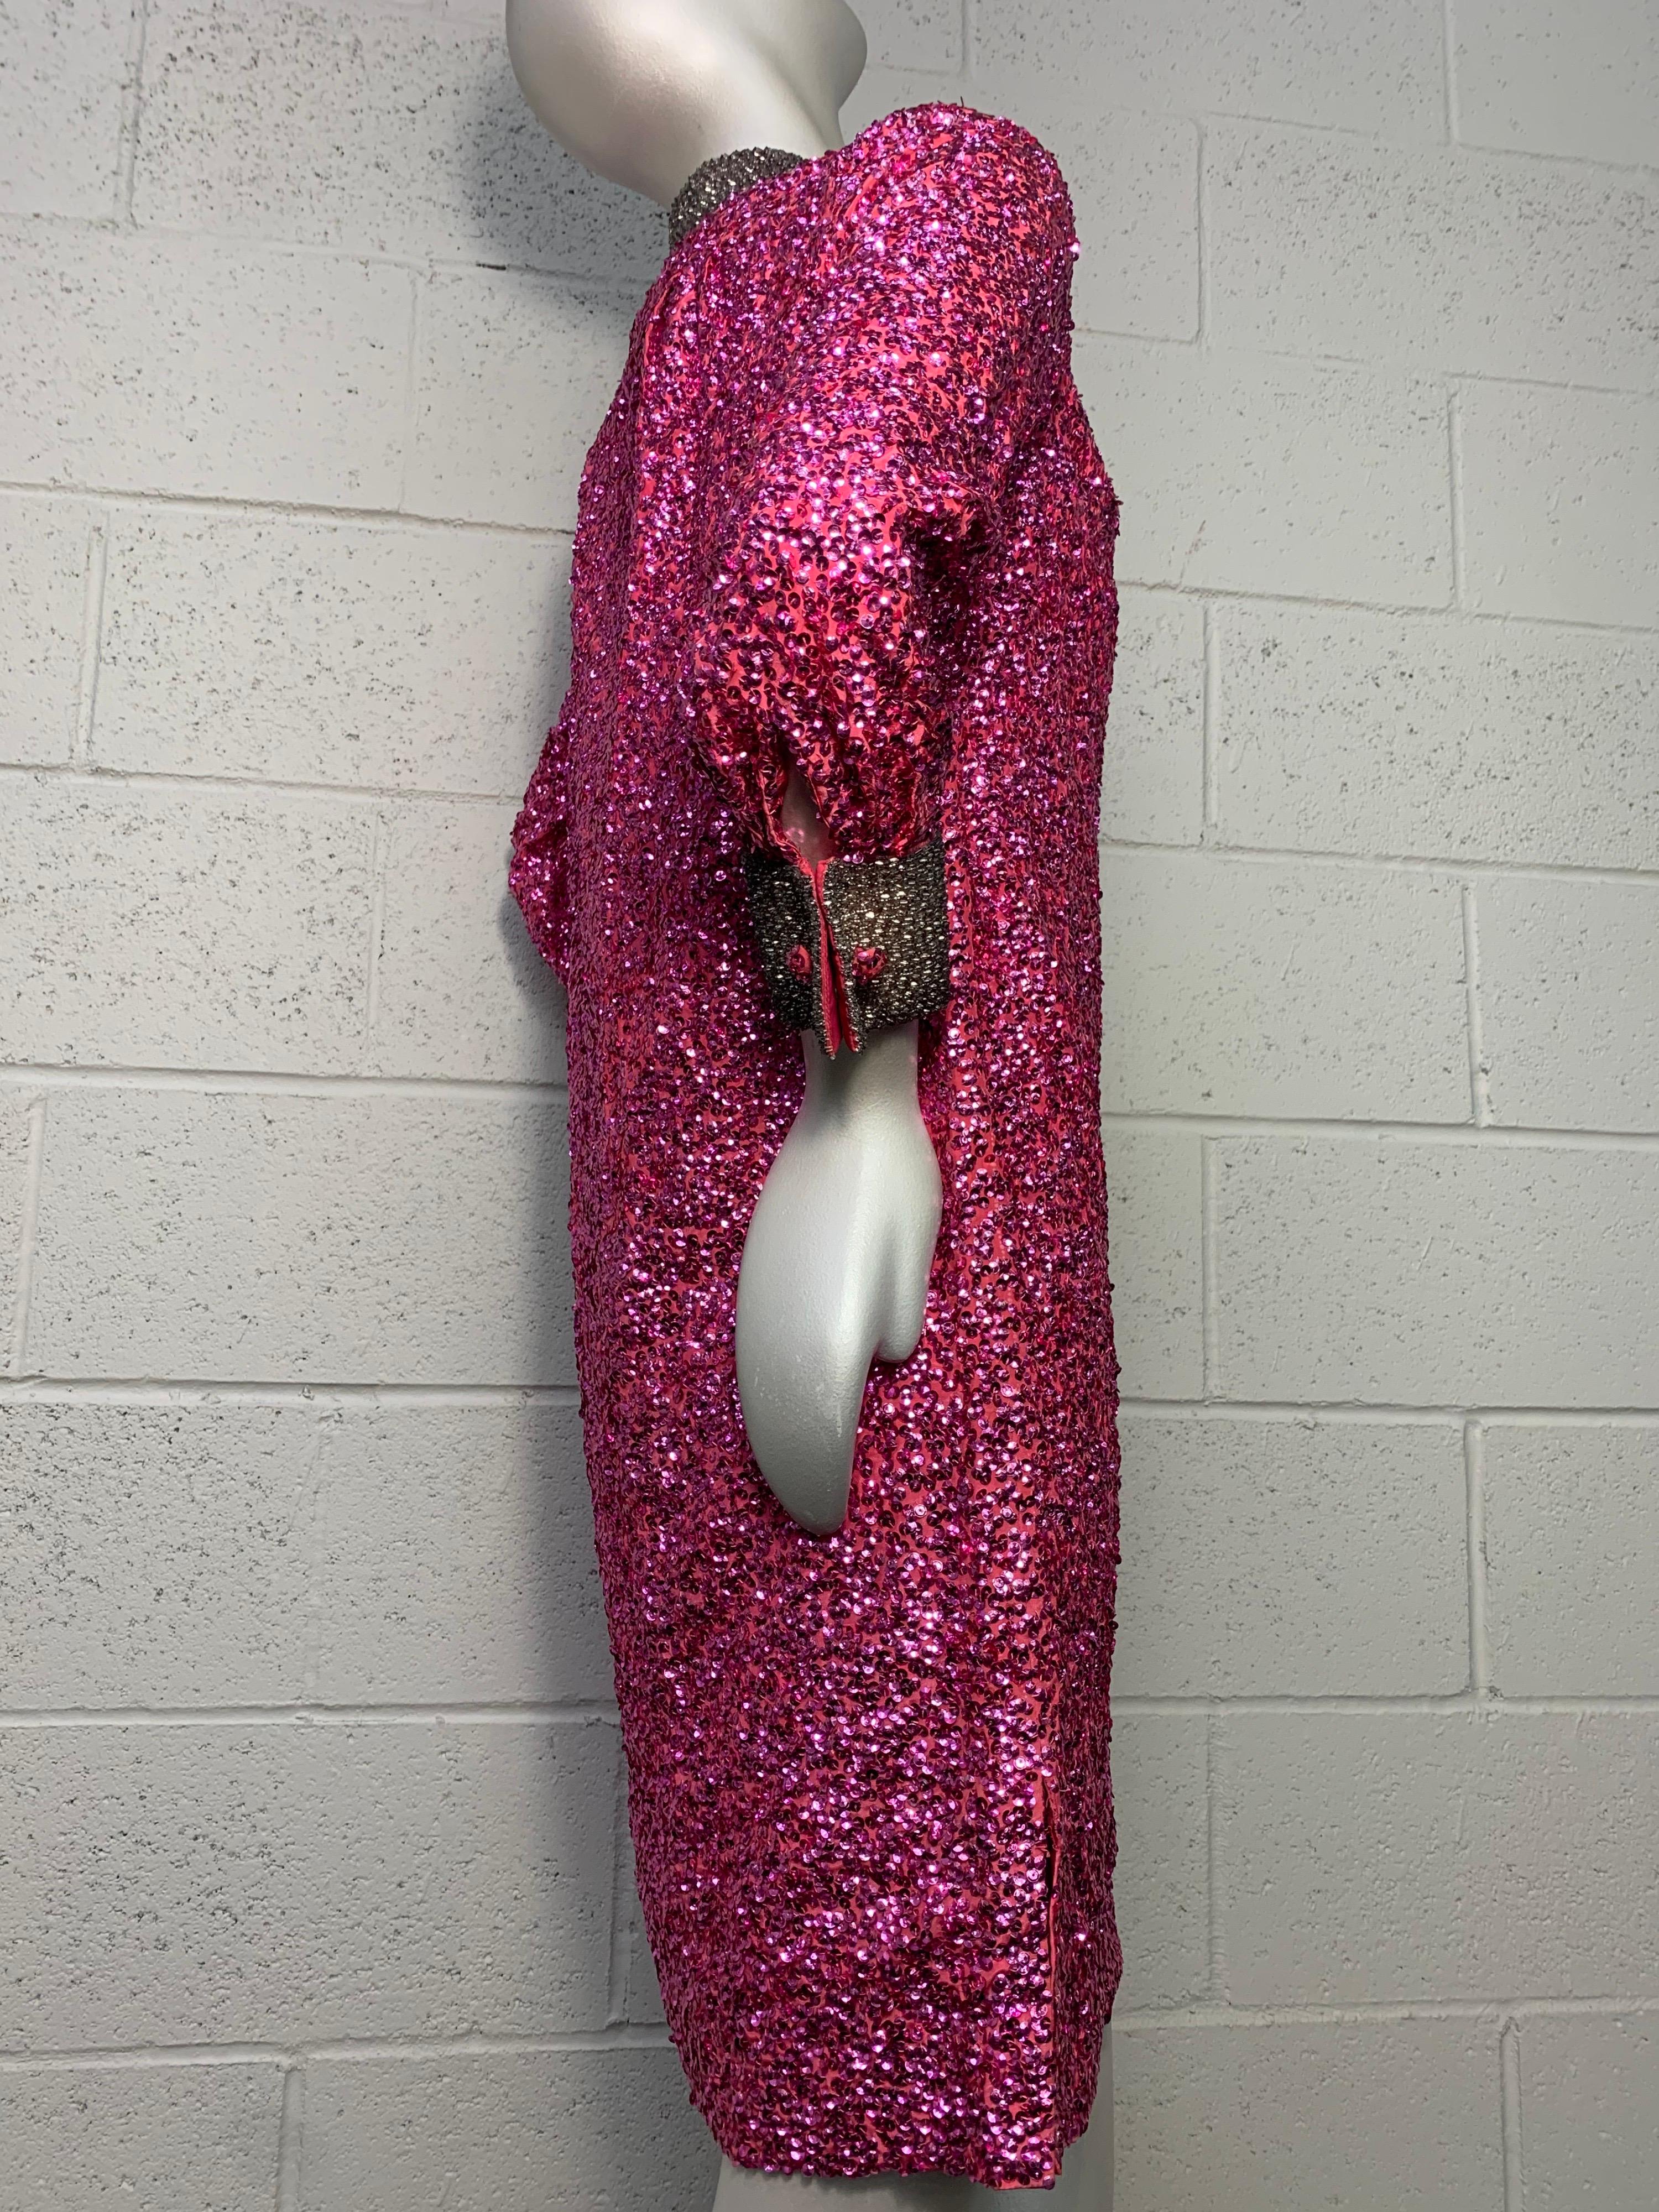 1960s Vivid Fuchsia Sequined Mod Mini Dress w/ Silver Beaded Collar and Cuffs For Sale 2